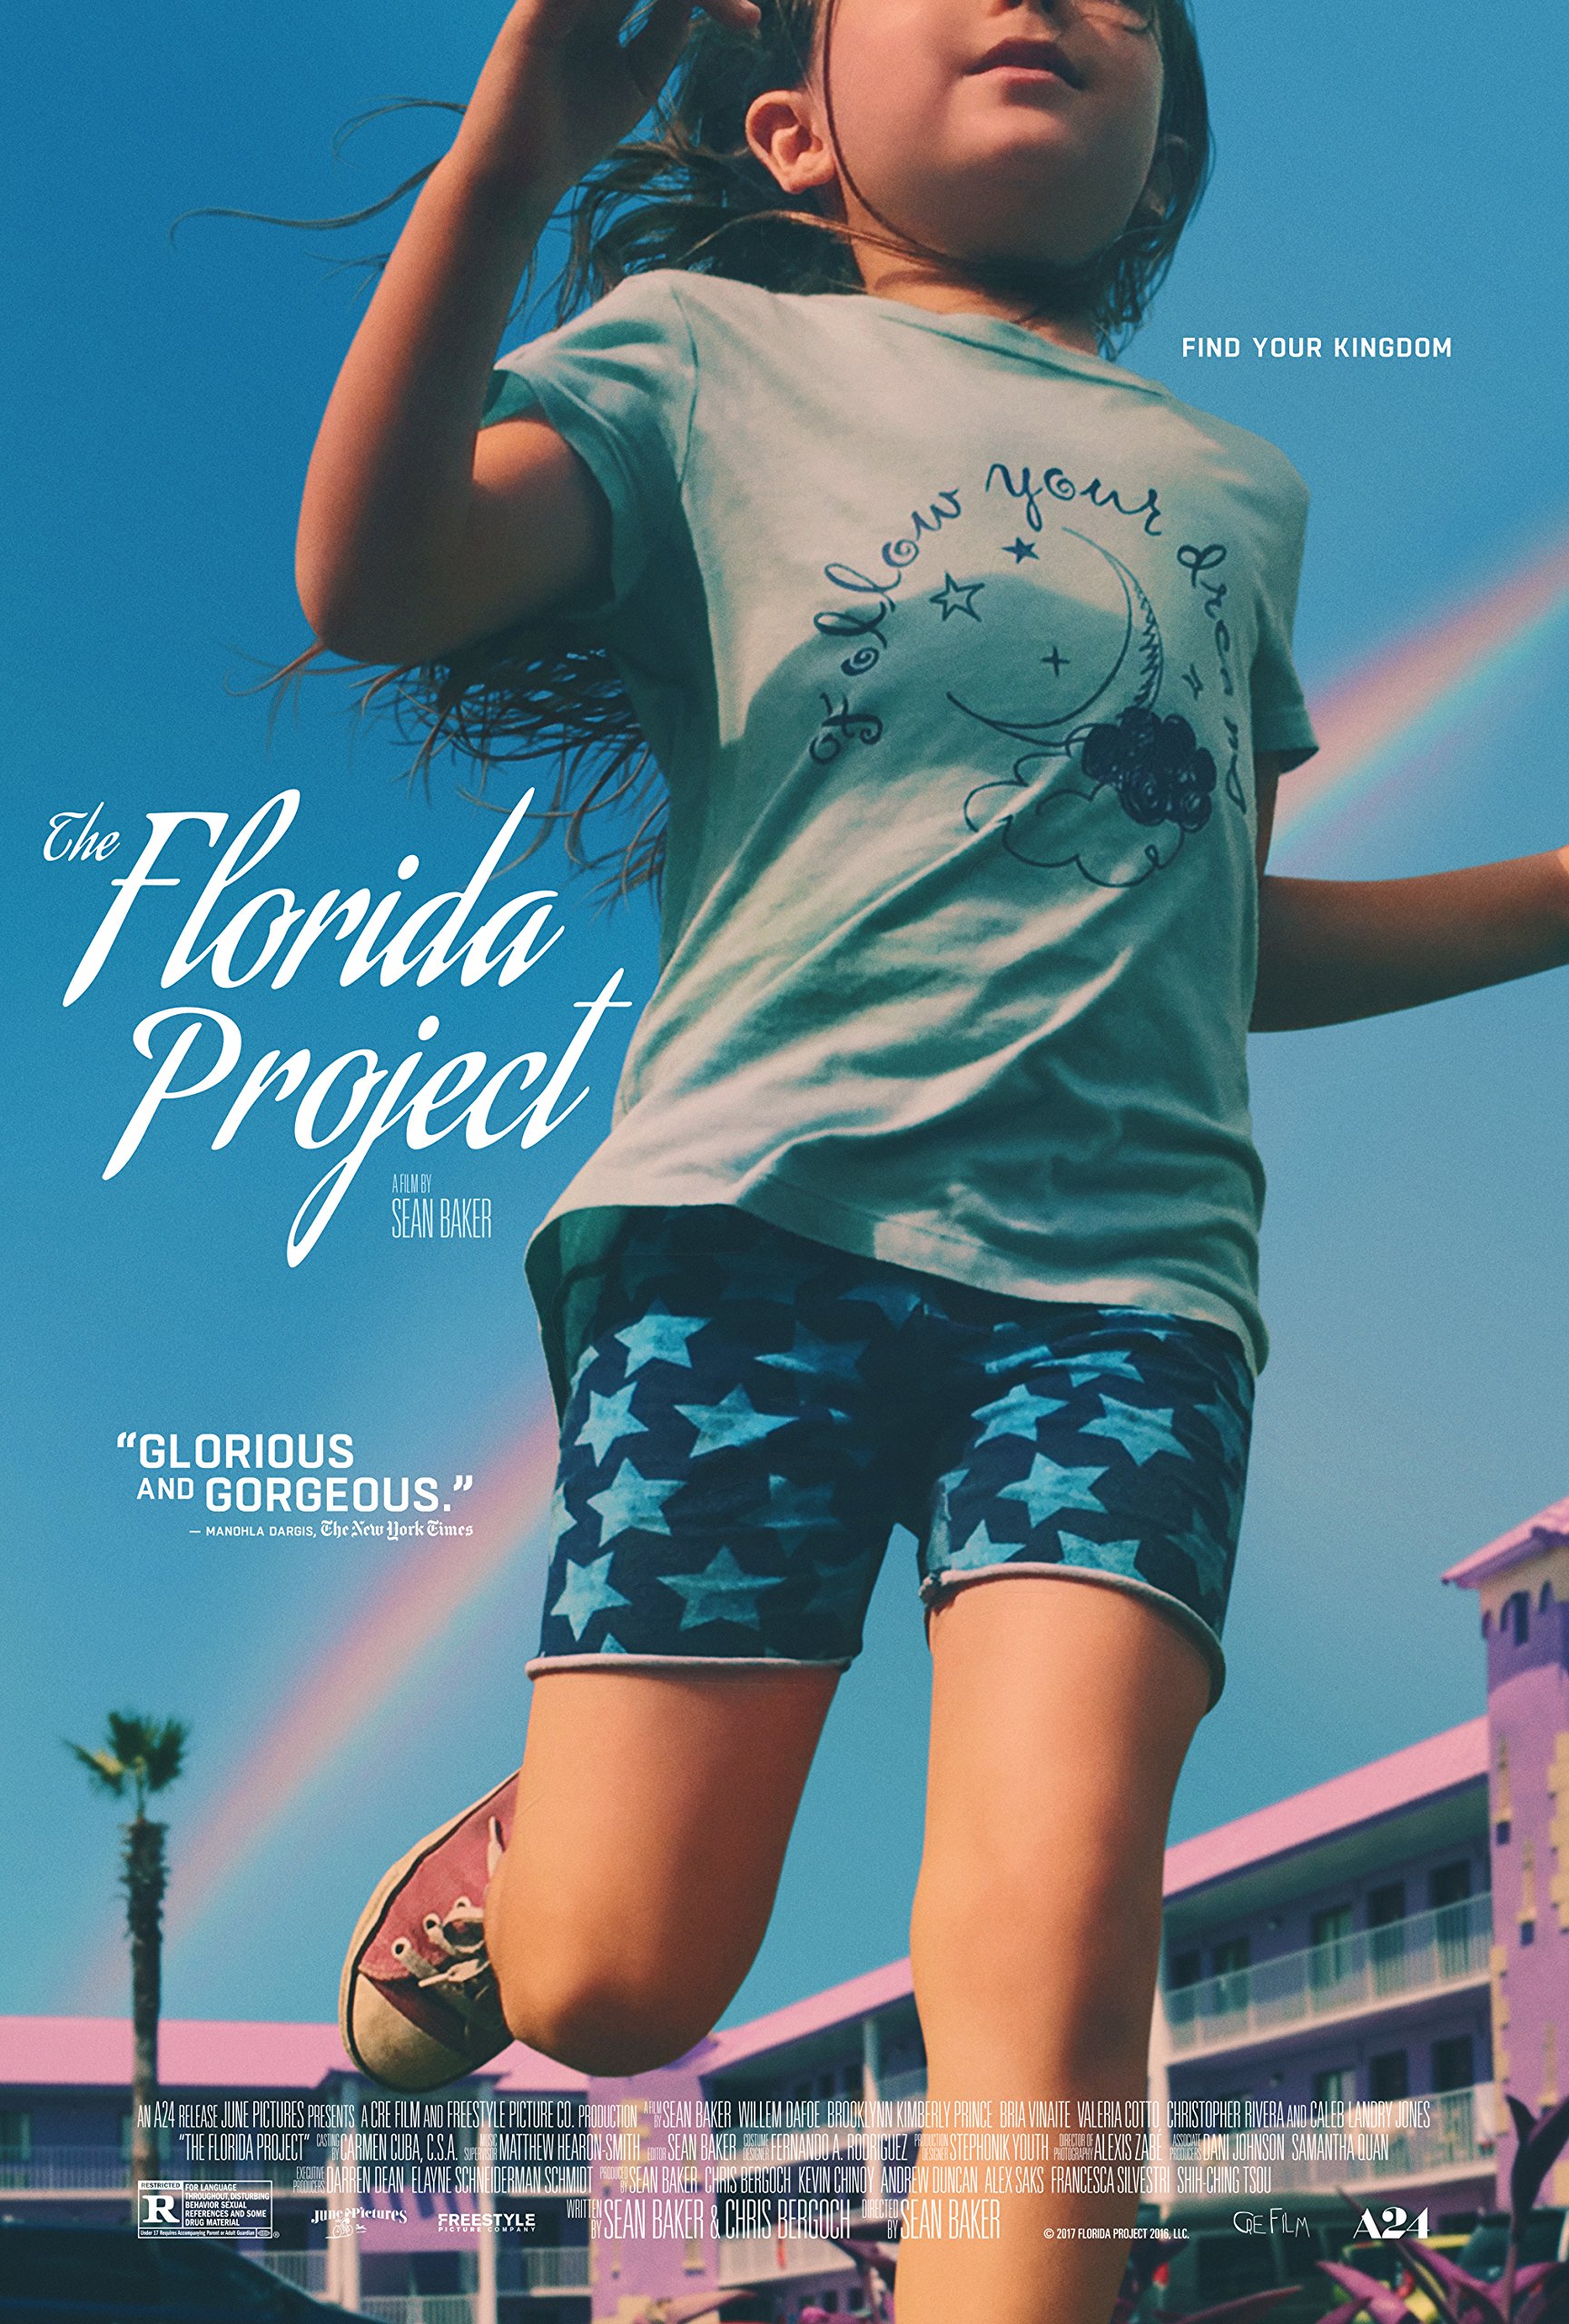 The Florida Project film poster